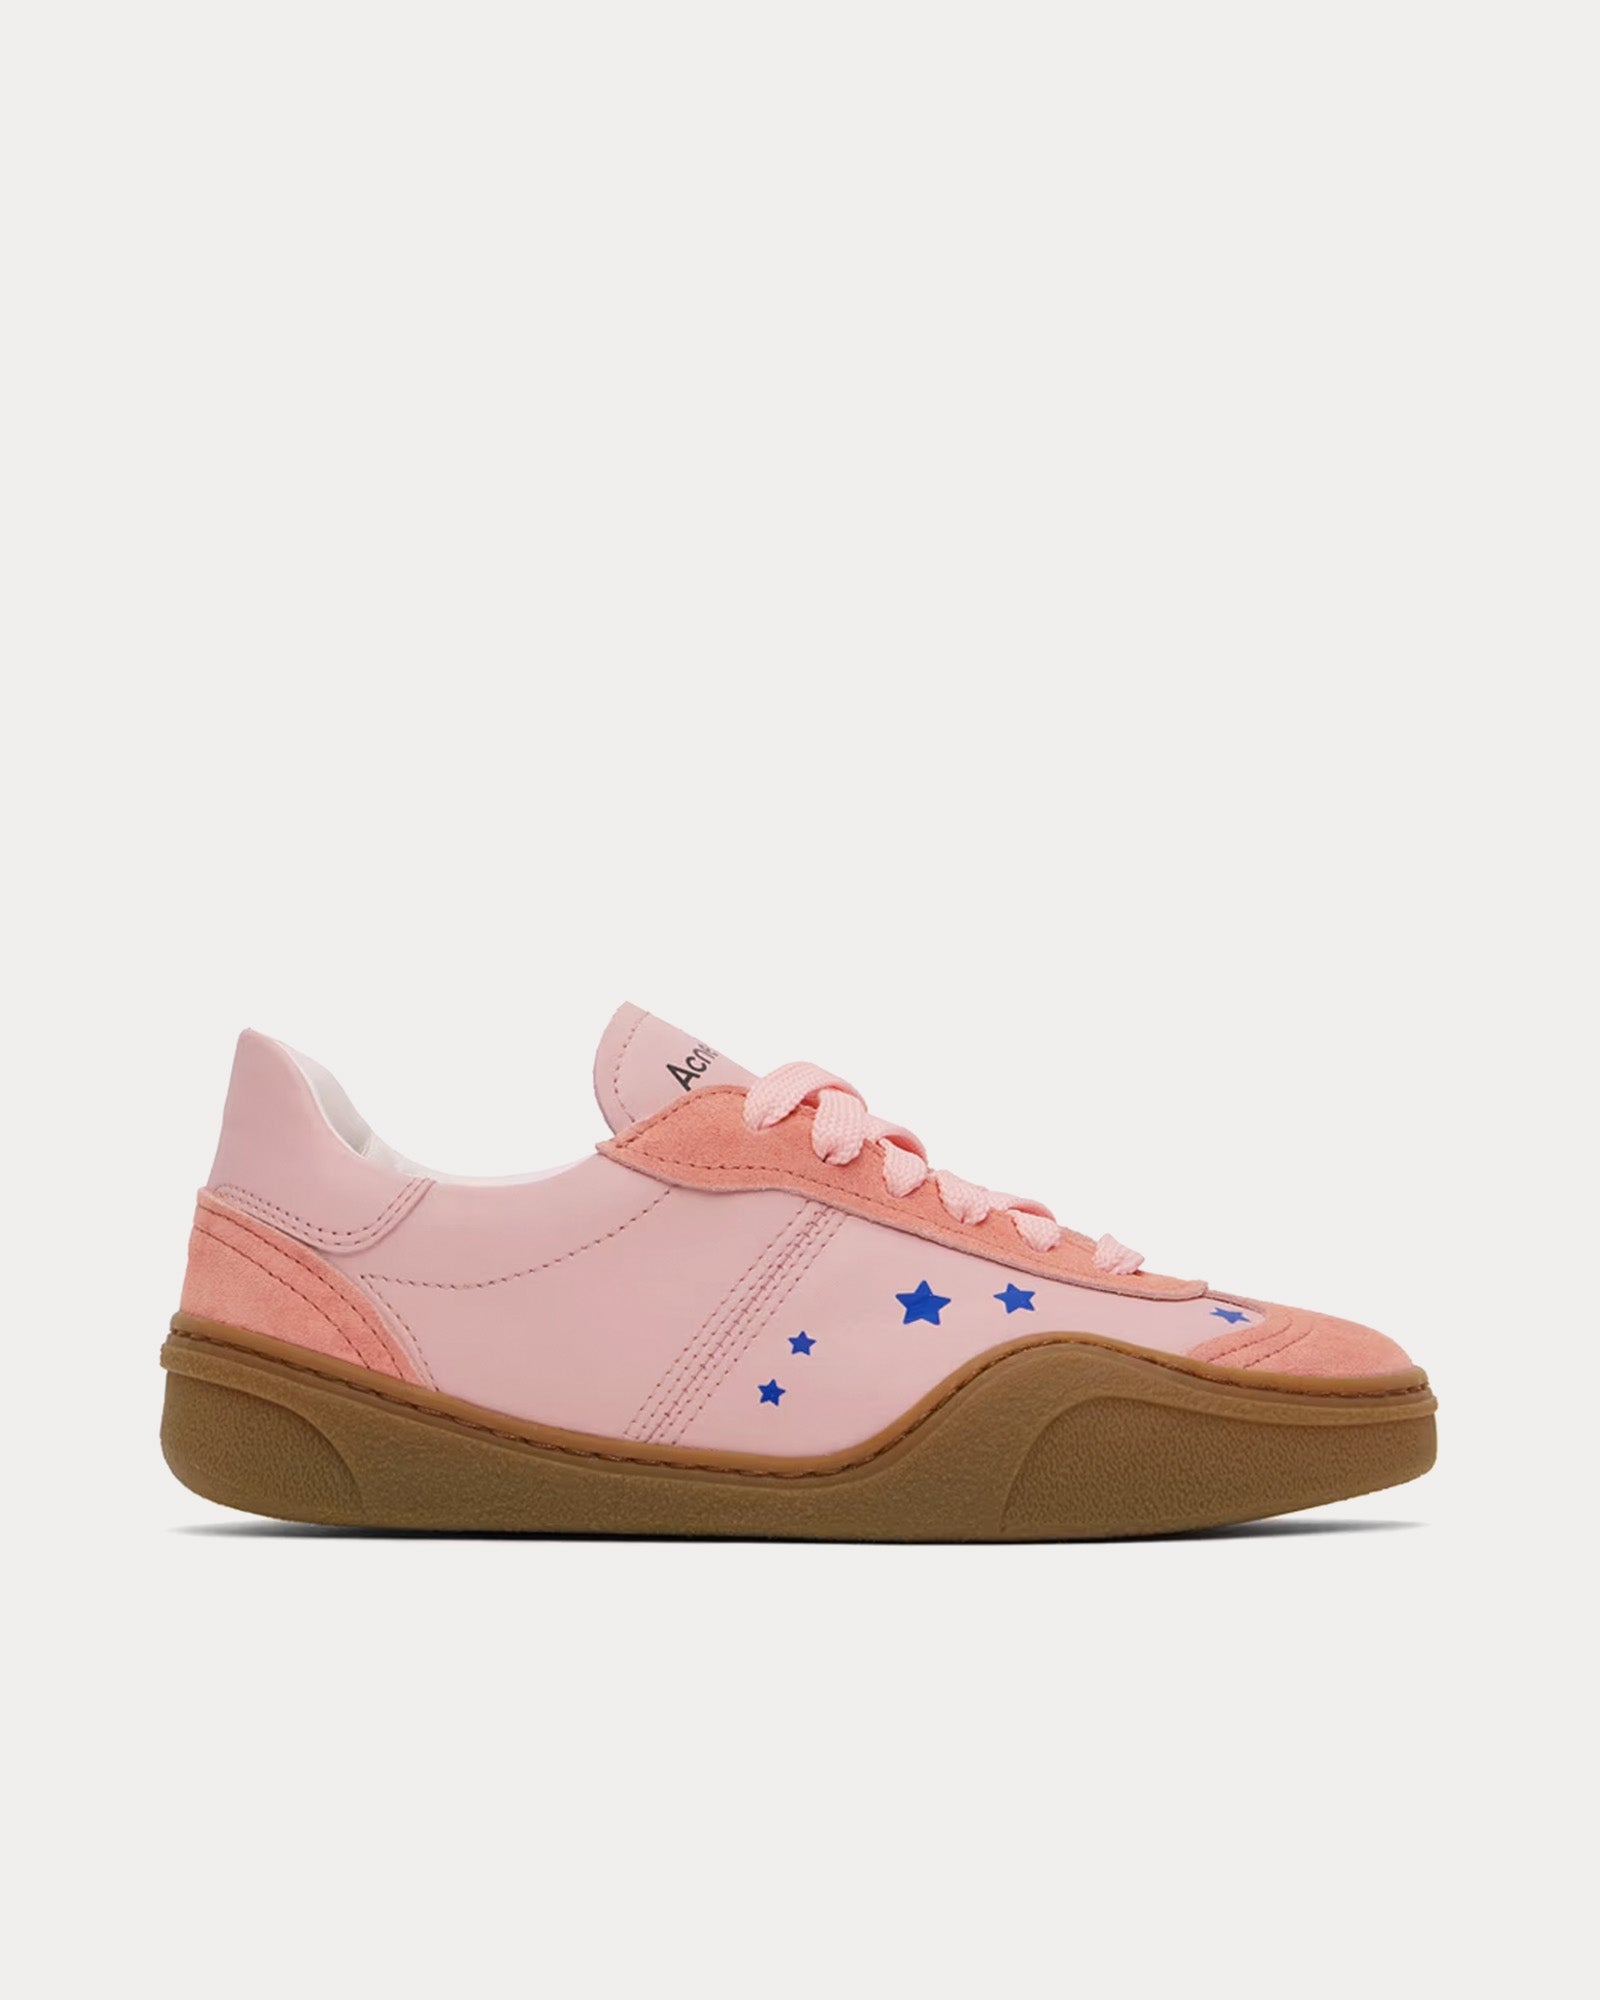 Acne Studios - Stars Lace-Up Peach Pink / Brown Low Top Sneakers